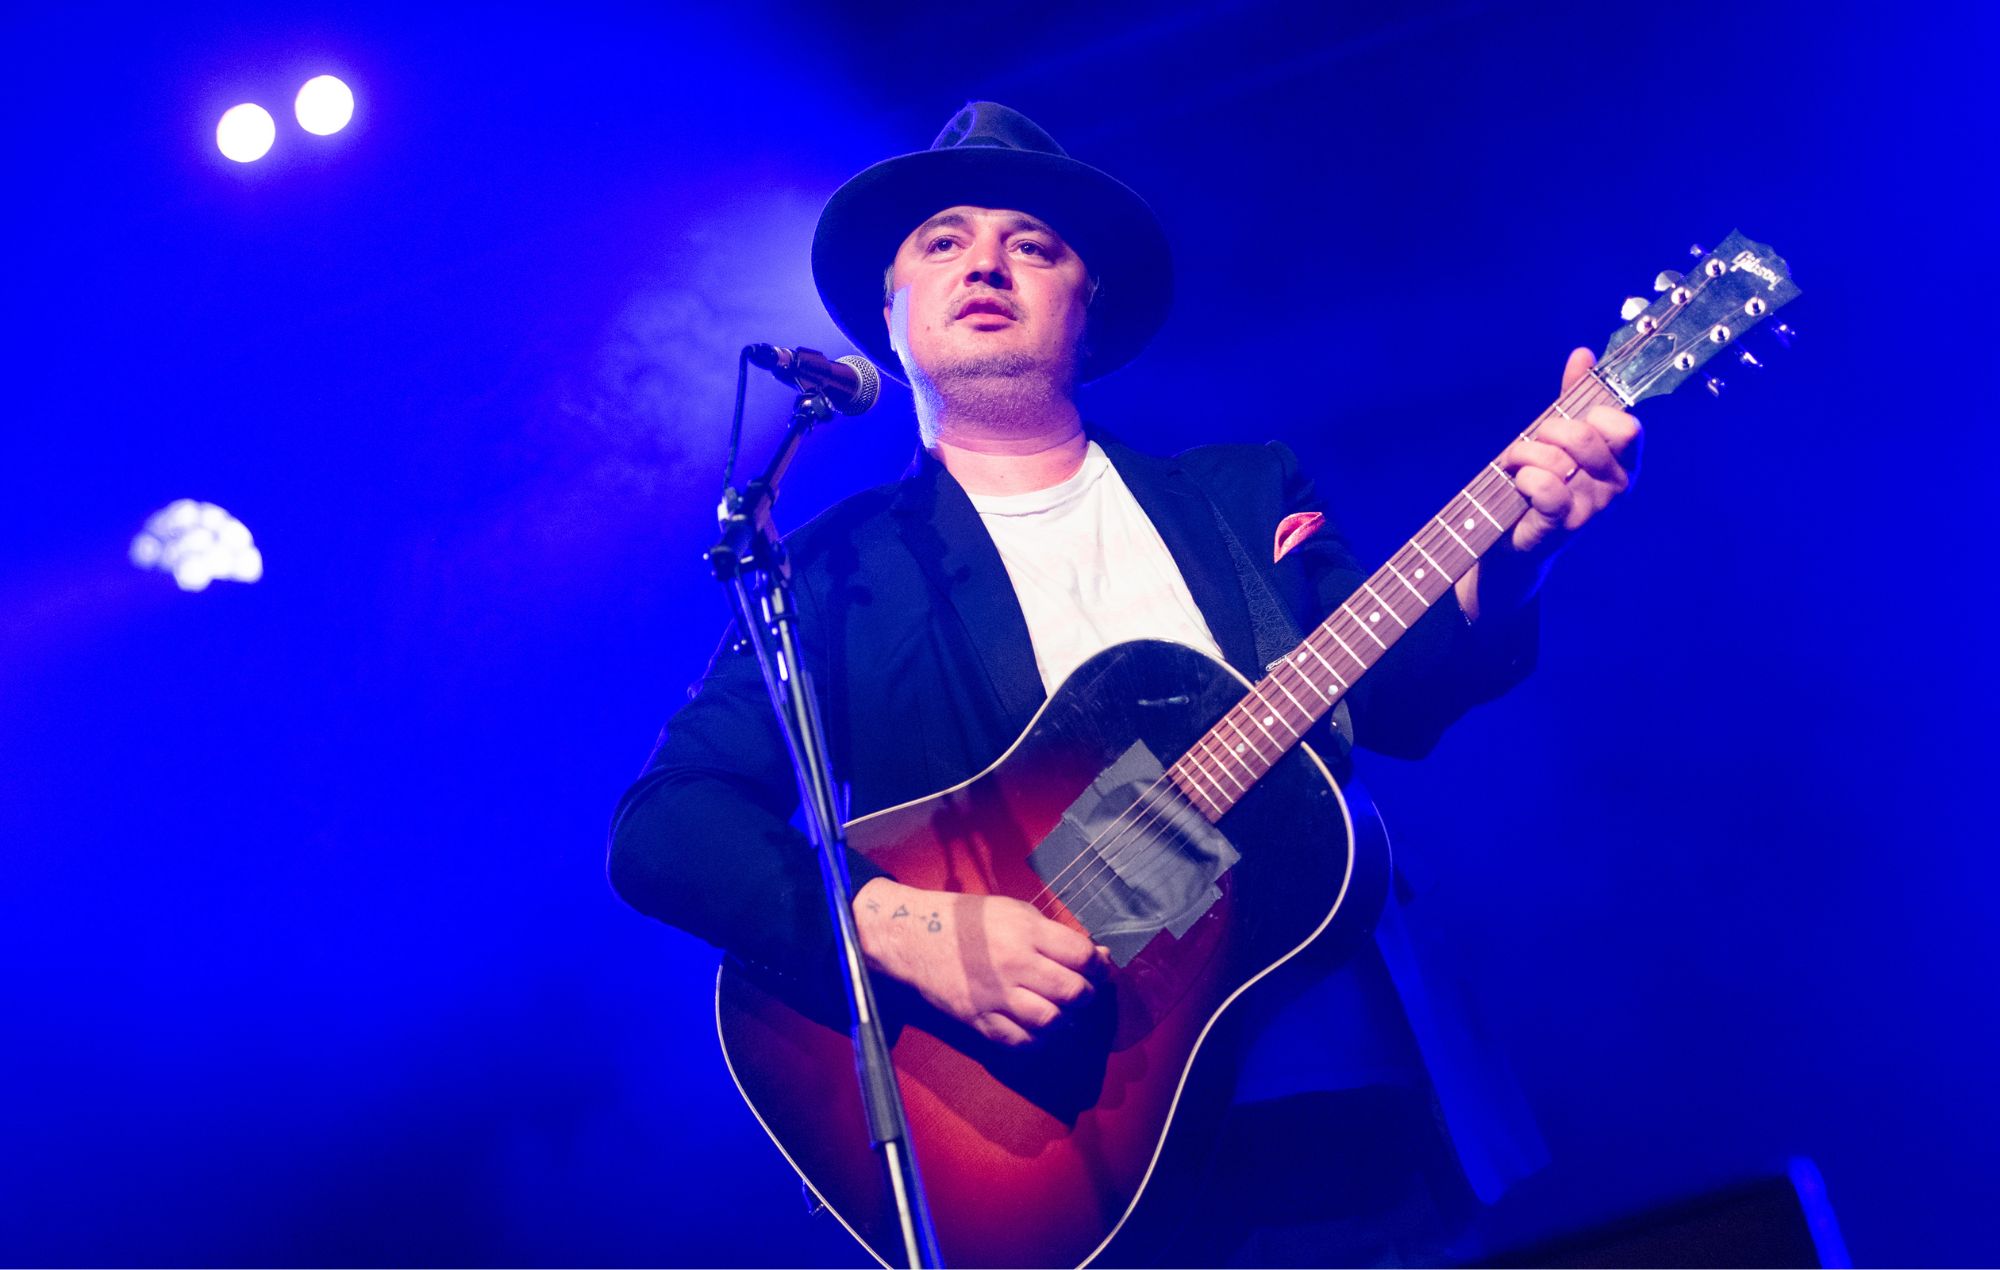 Peter Doherty performs on stage at SWG3 on April 18, 2023